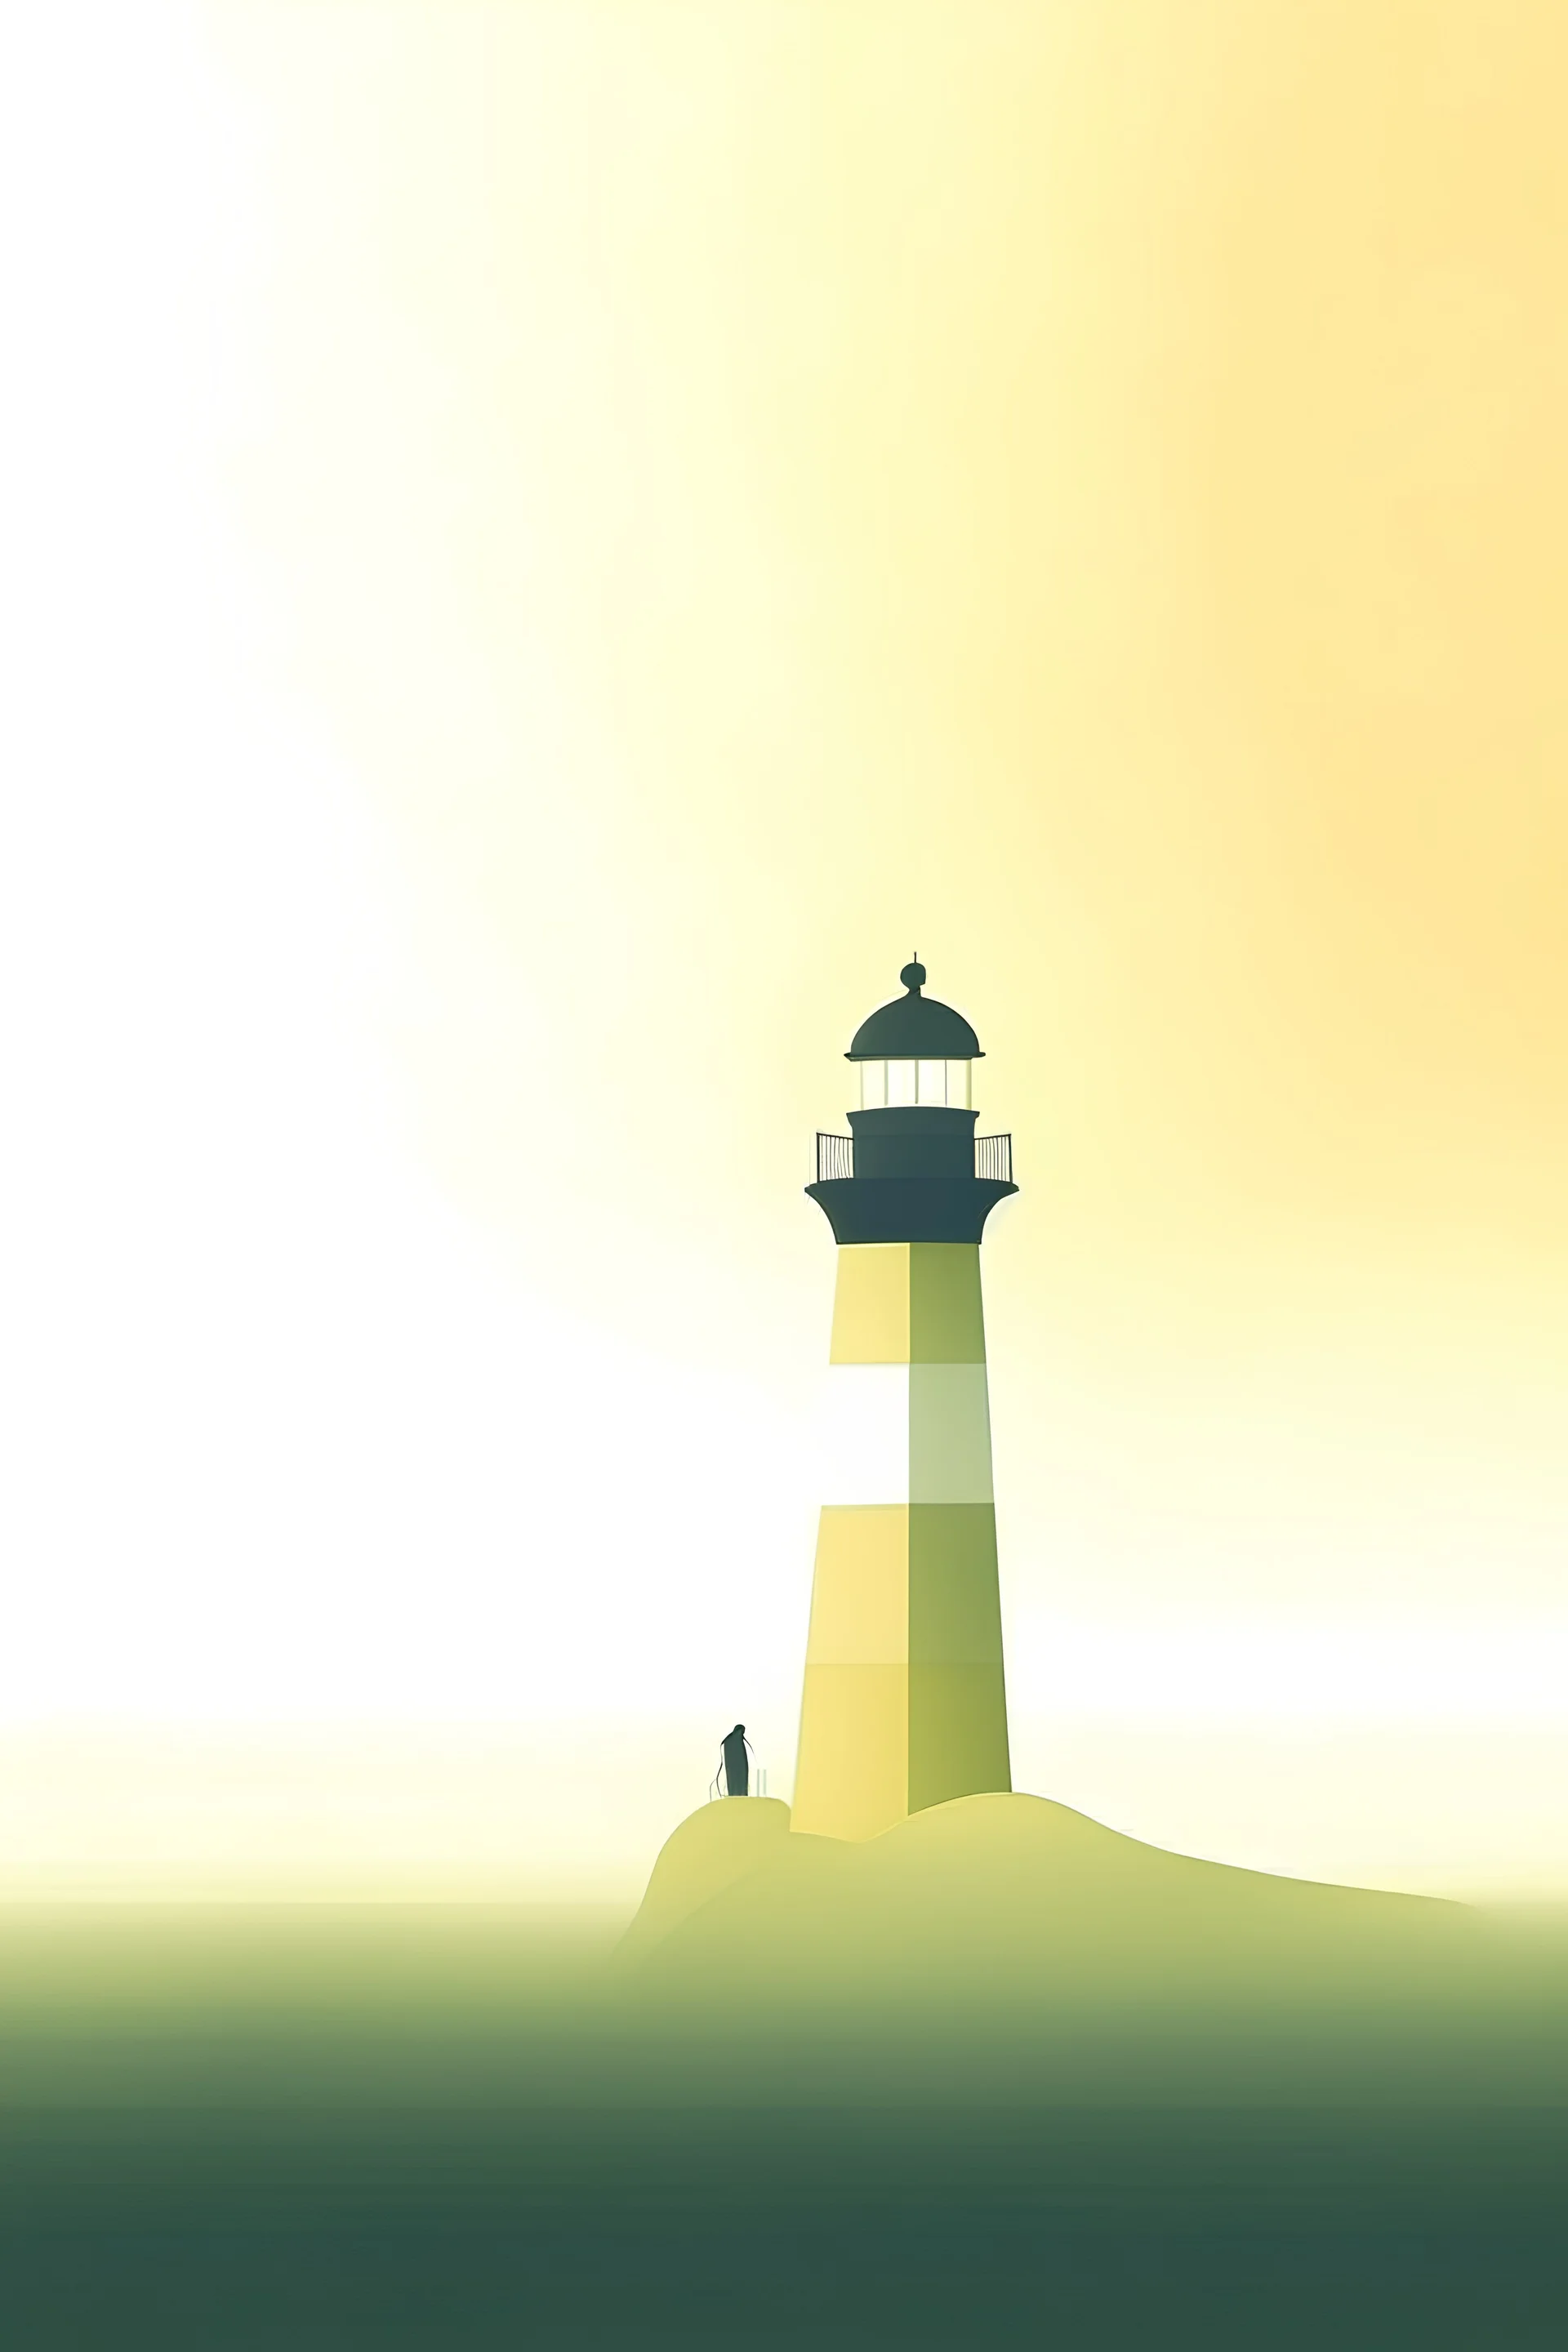 A minimalist depiction of a lighthouse beam cutting through the fog, representing guidance, safety, and the beacon of hope in times of uncertainty. with light color background